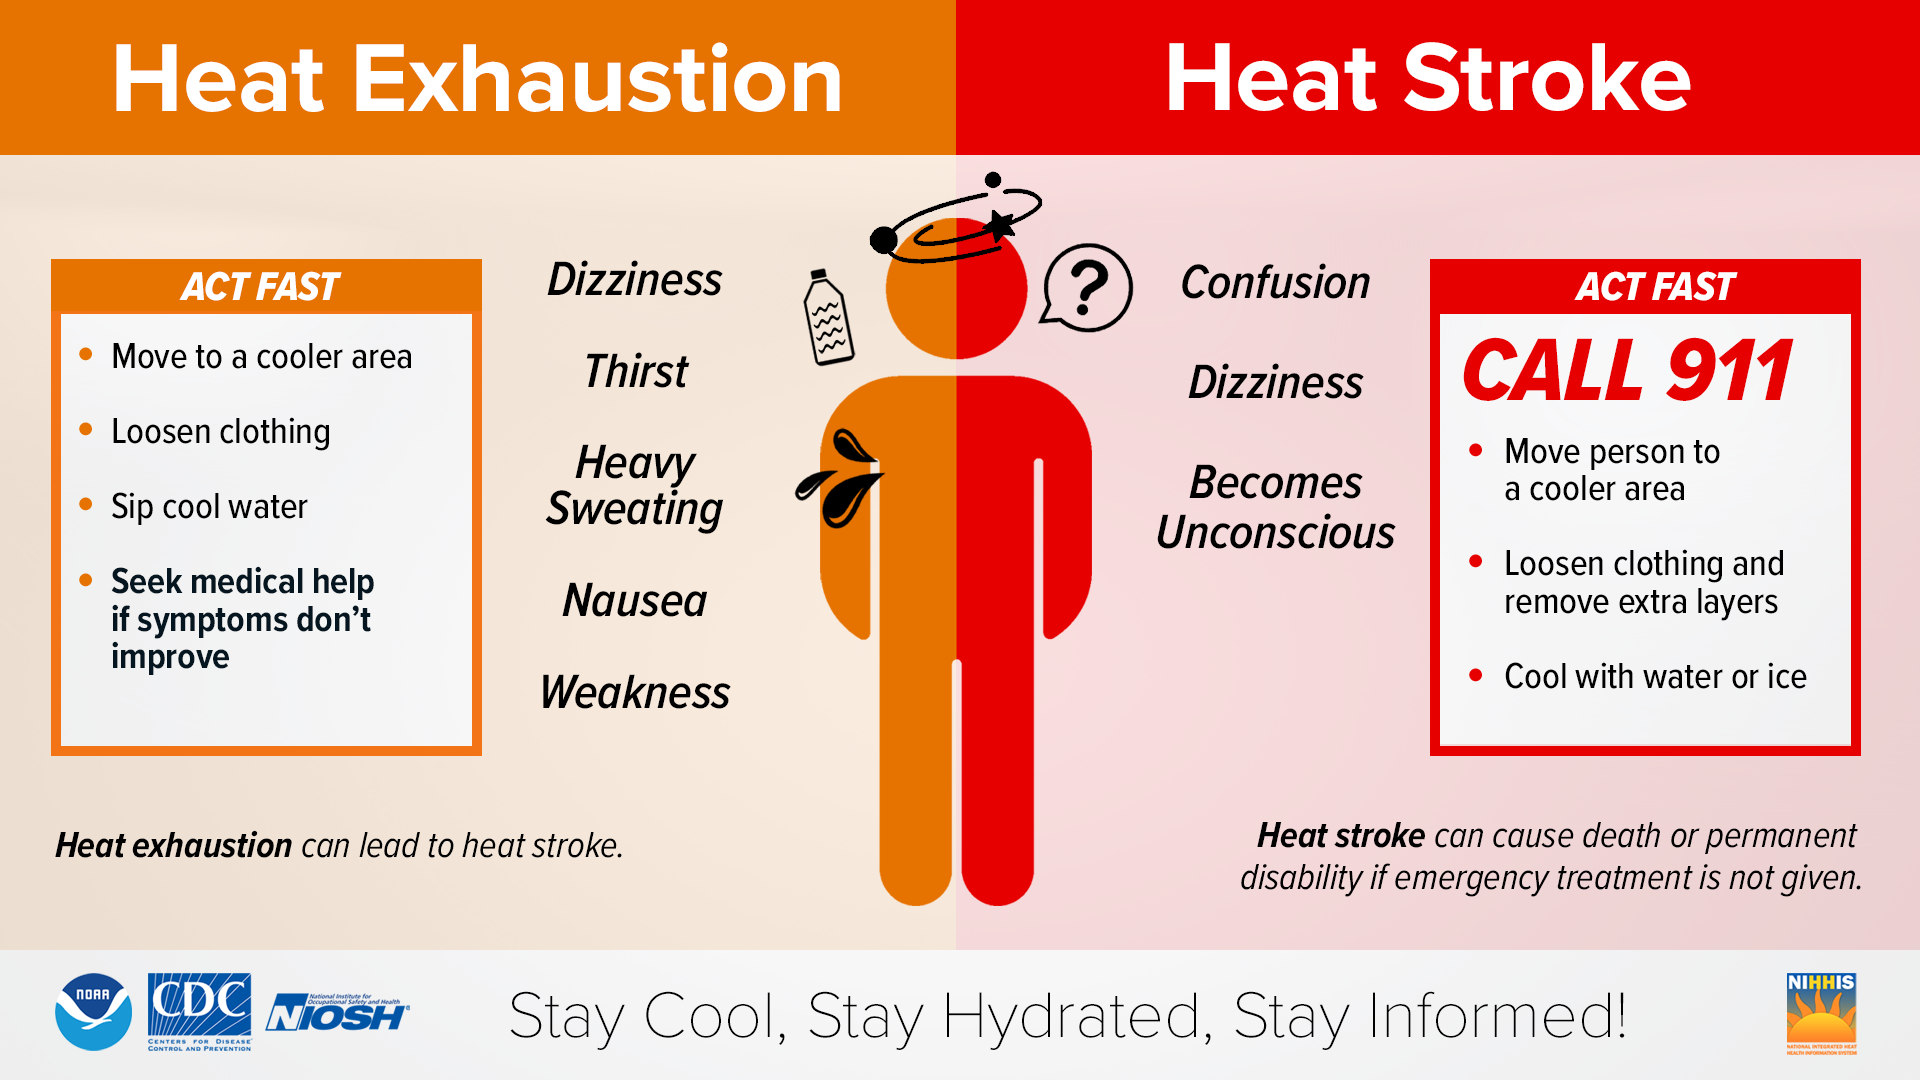 Heat Exhaustion Symptoms are: Dizziness Thirst, sweating, nausea and weakness. Heat stroke symptoms are confusion, dizziness and loss of consciousness. 